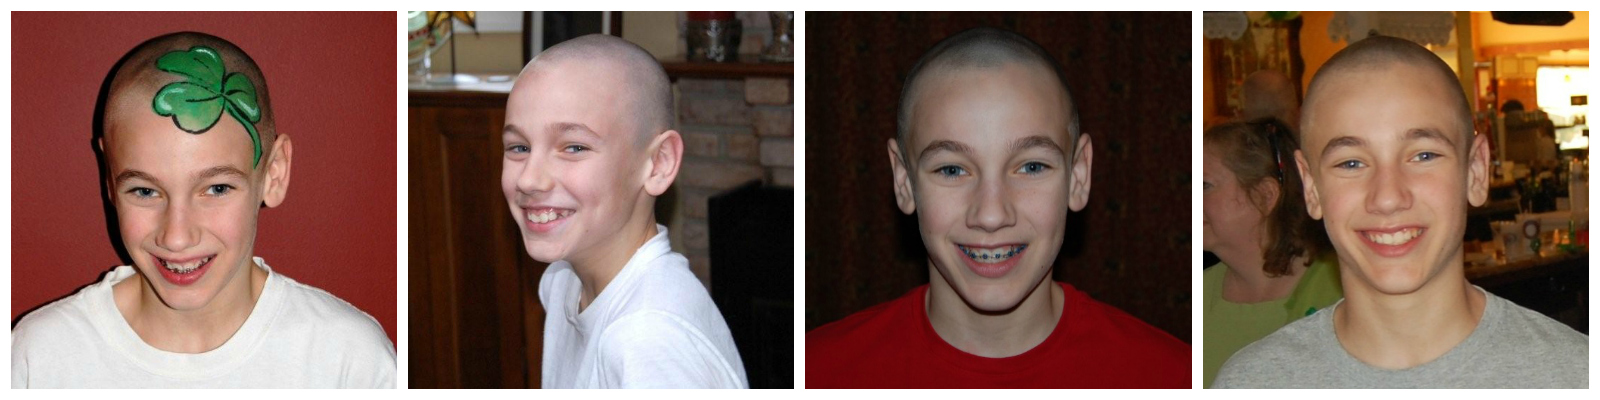 Aaron after shaving his head to help fund pediatric cancer research